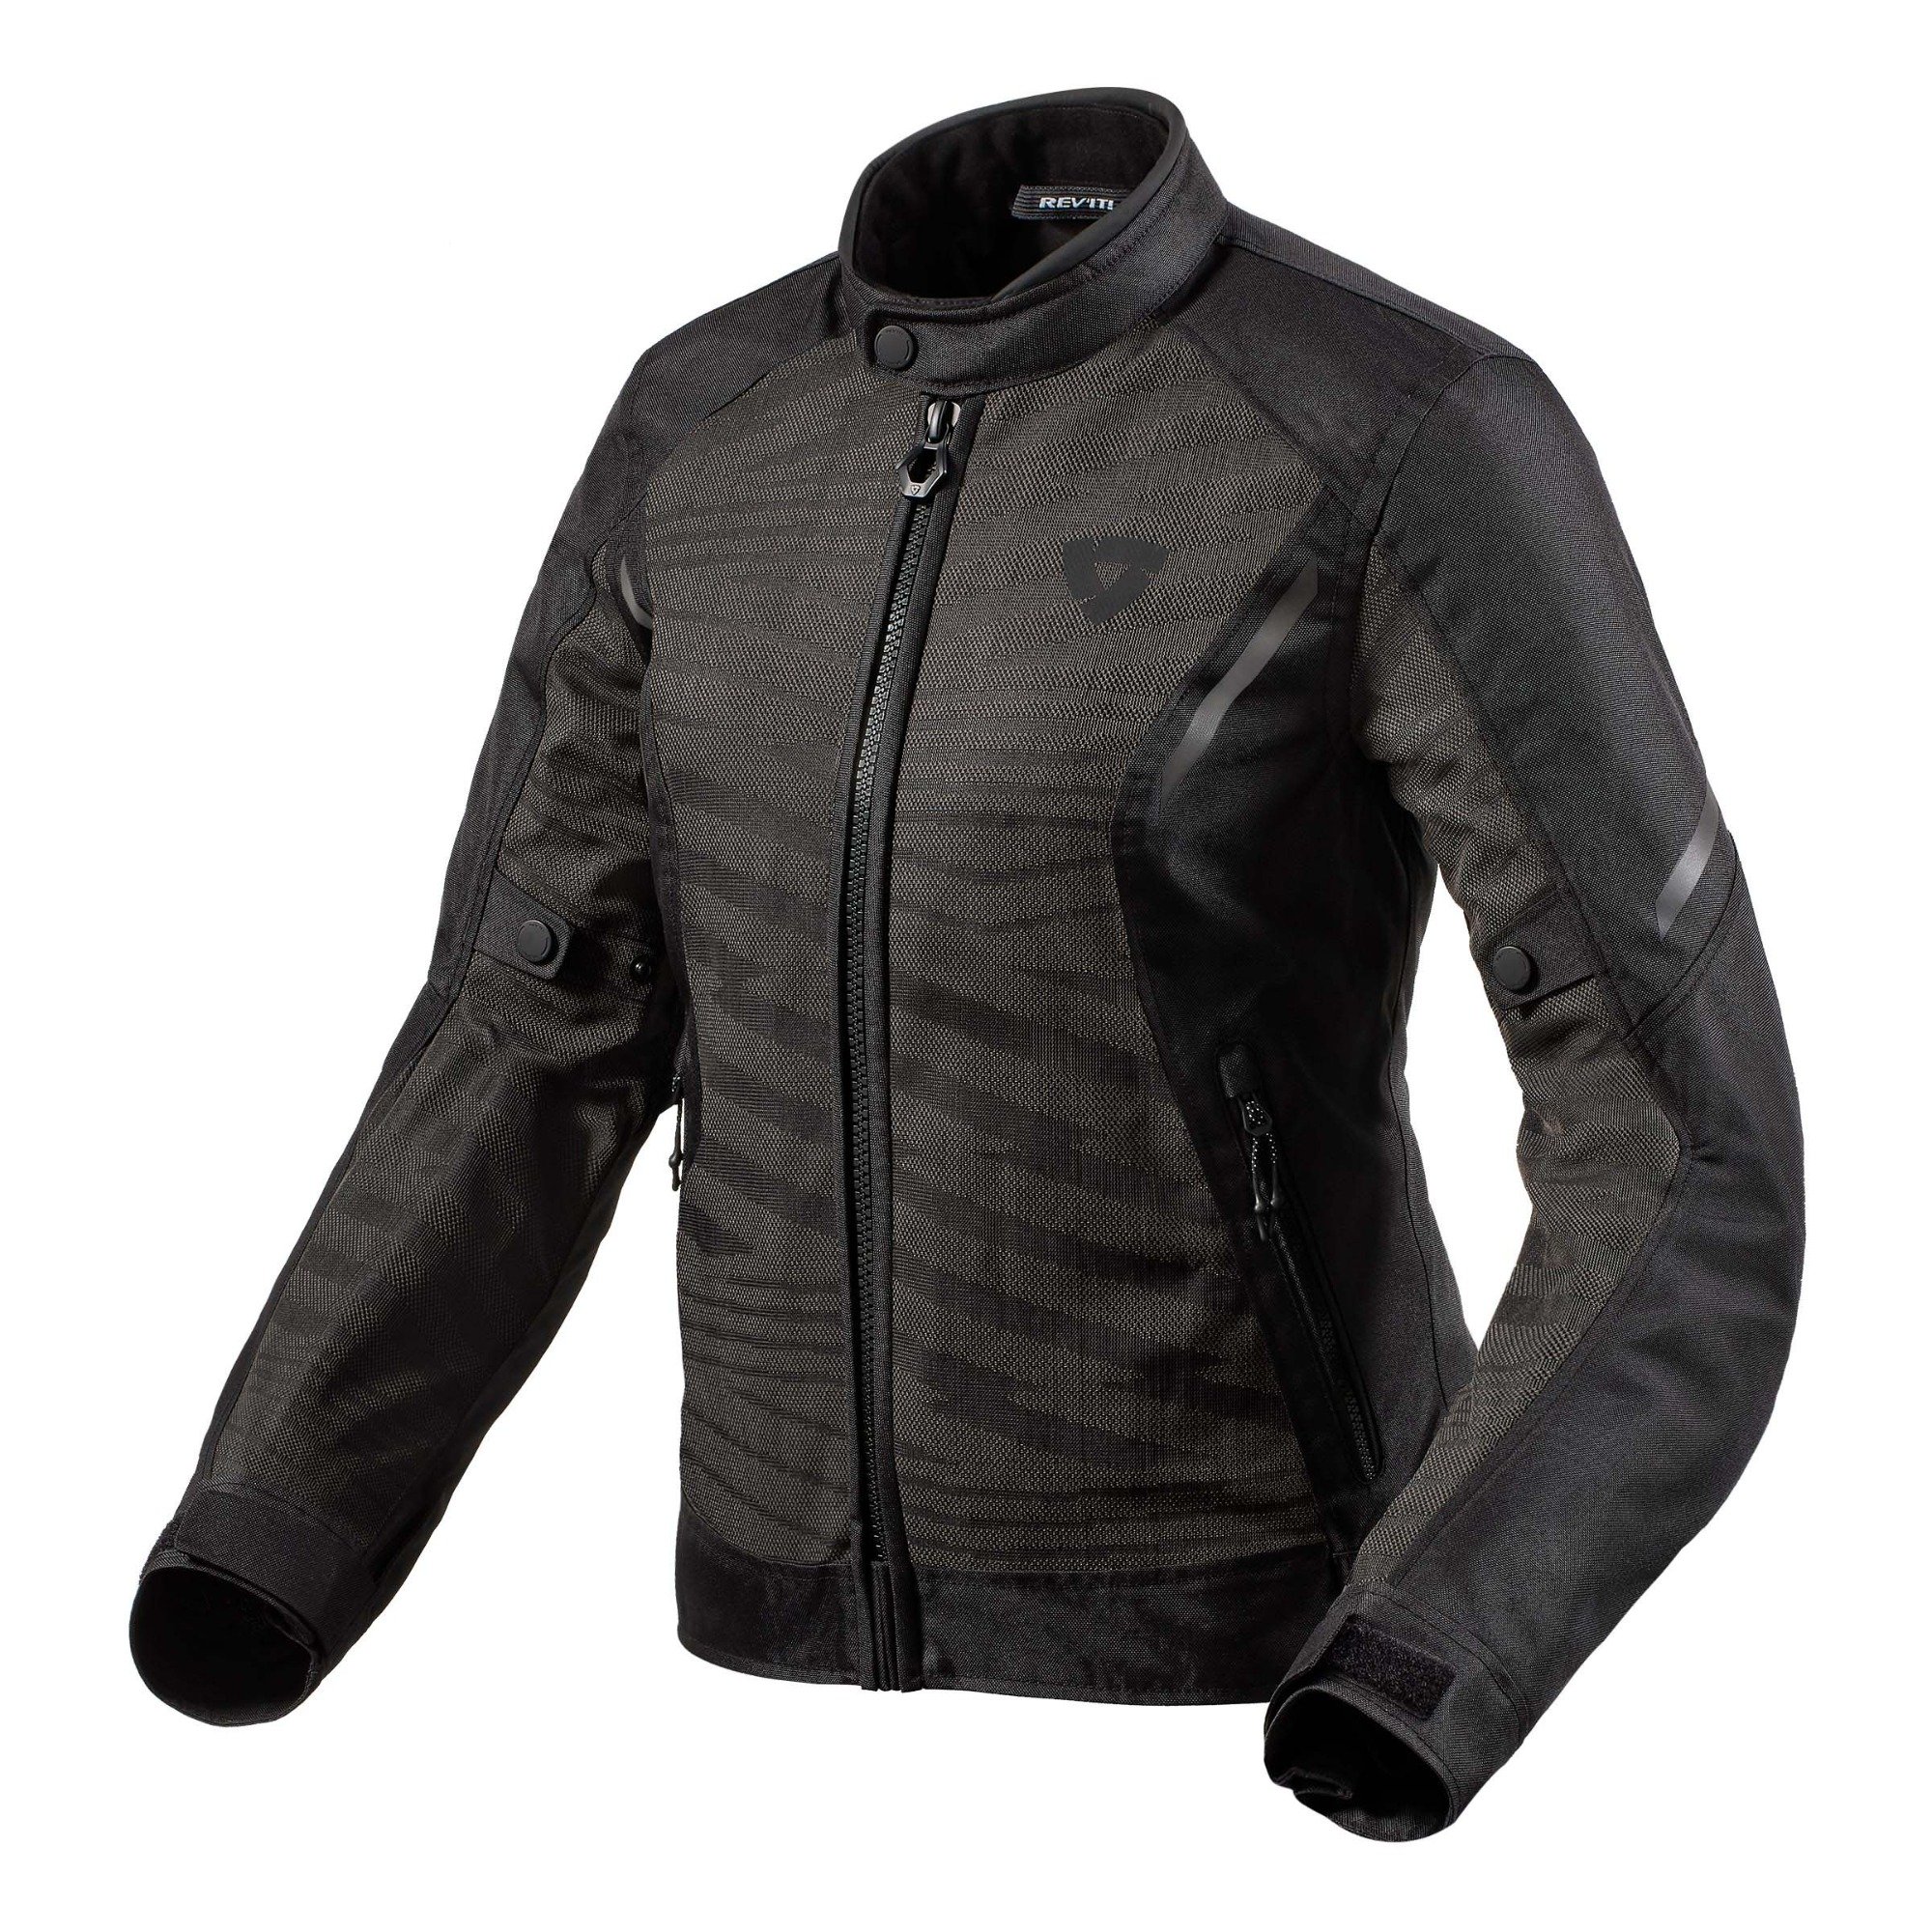 Image of REV'IT! Torque 2 H2O Jacket Lady Black Anthracite Size 40 ID 8700001345521